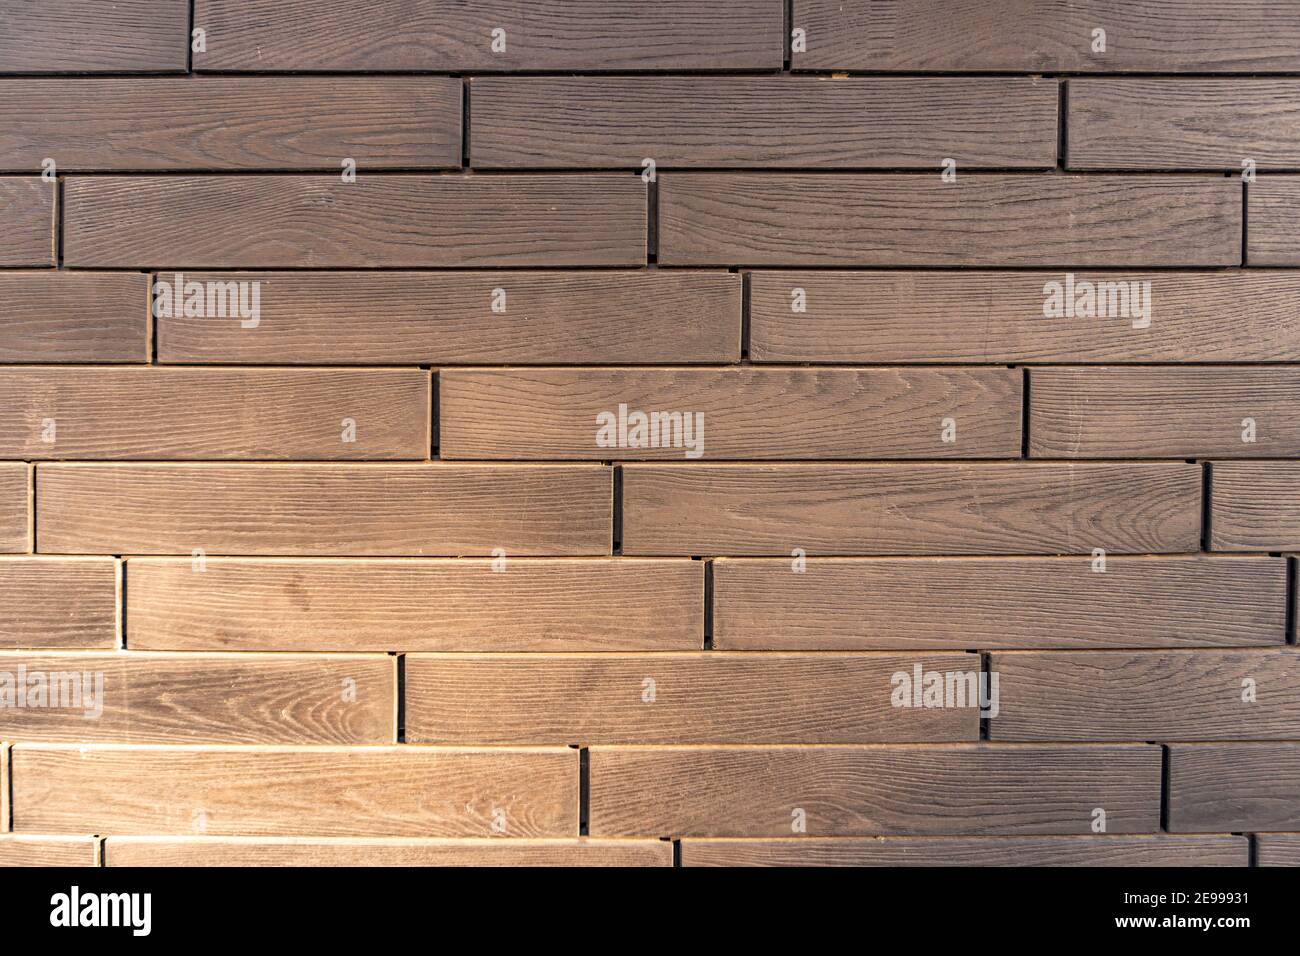 Building cladding with a ventilated facade, wooden texture, gray wood pattern Stock Photo